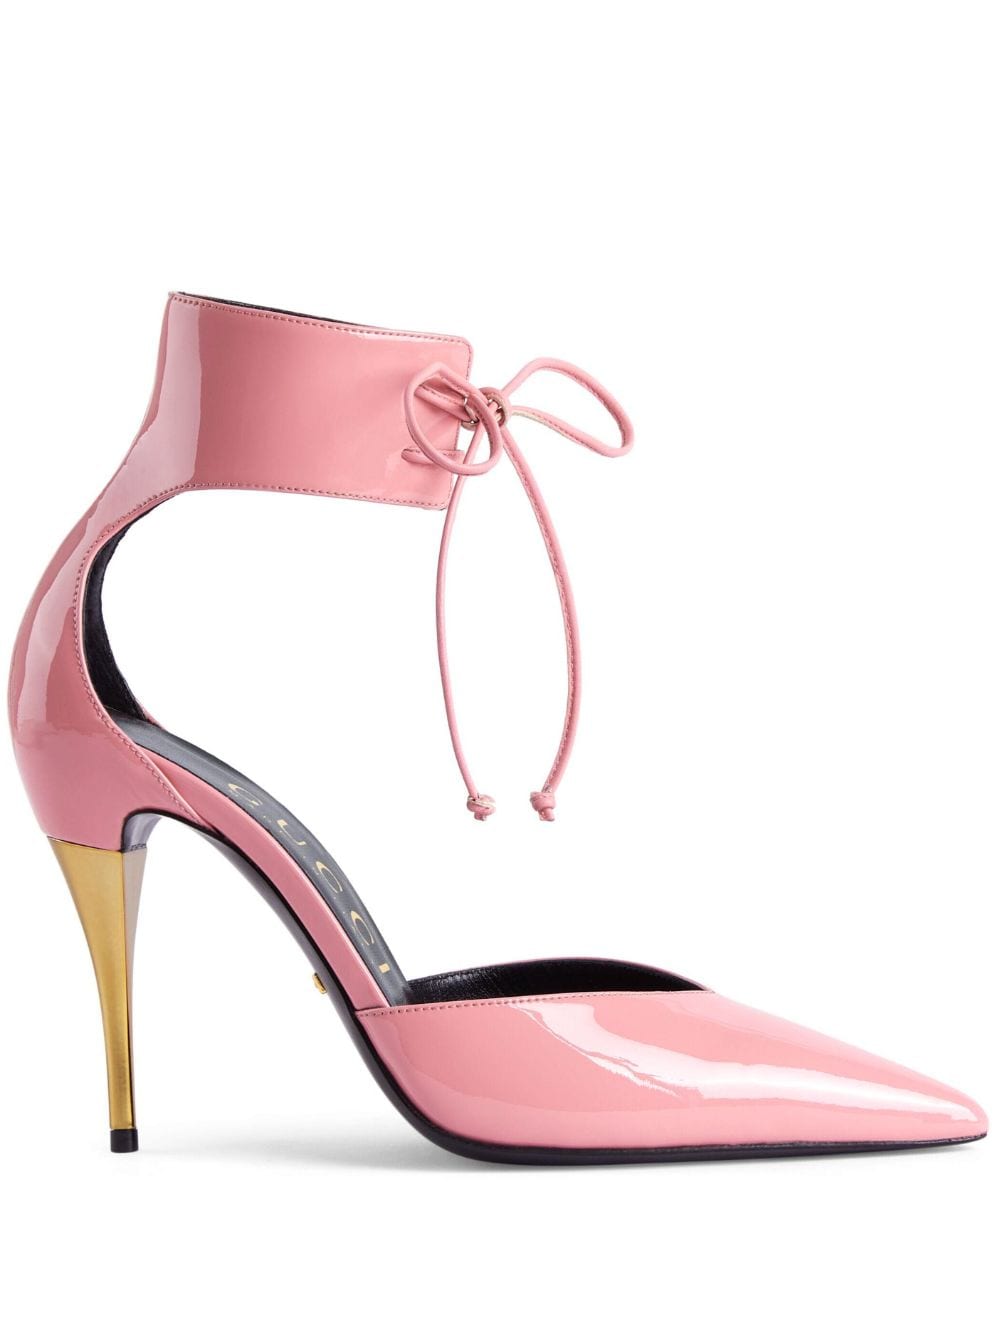 Image 1 of Gucci ankle-cuff leather pumps